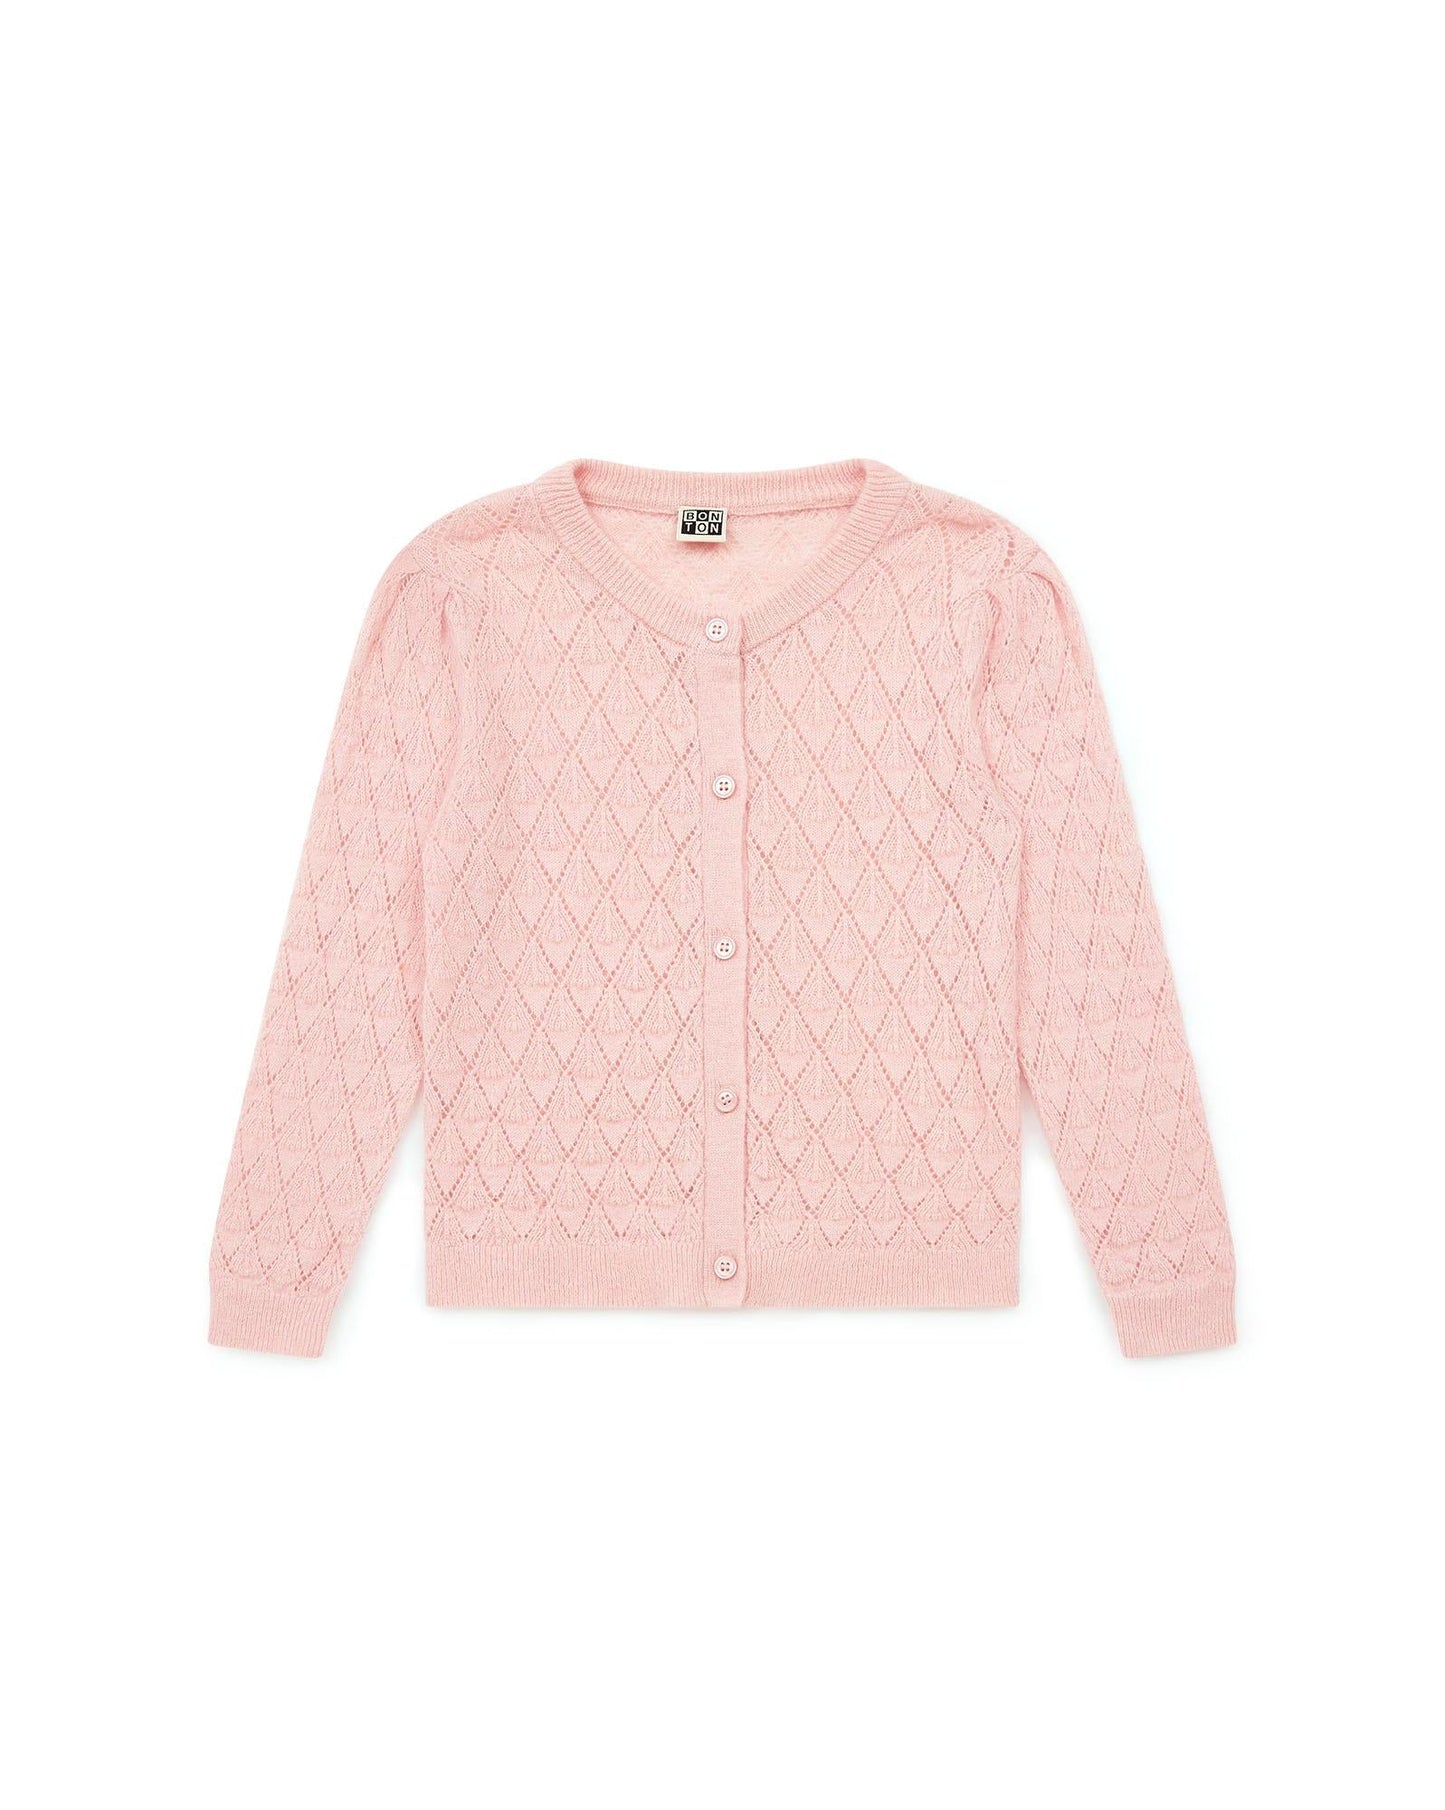 Cardigan Francis Pink in a knit